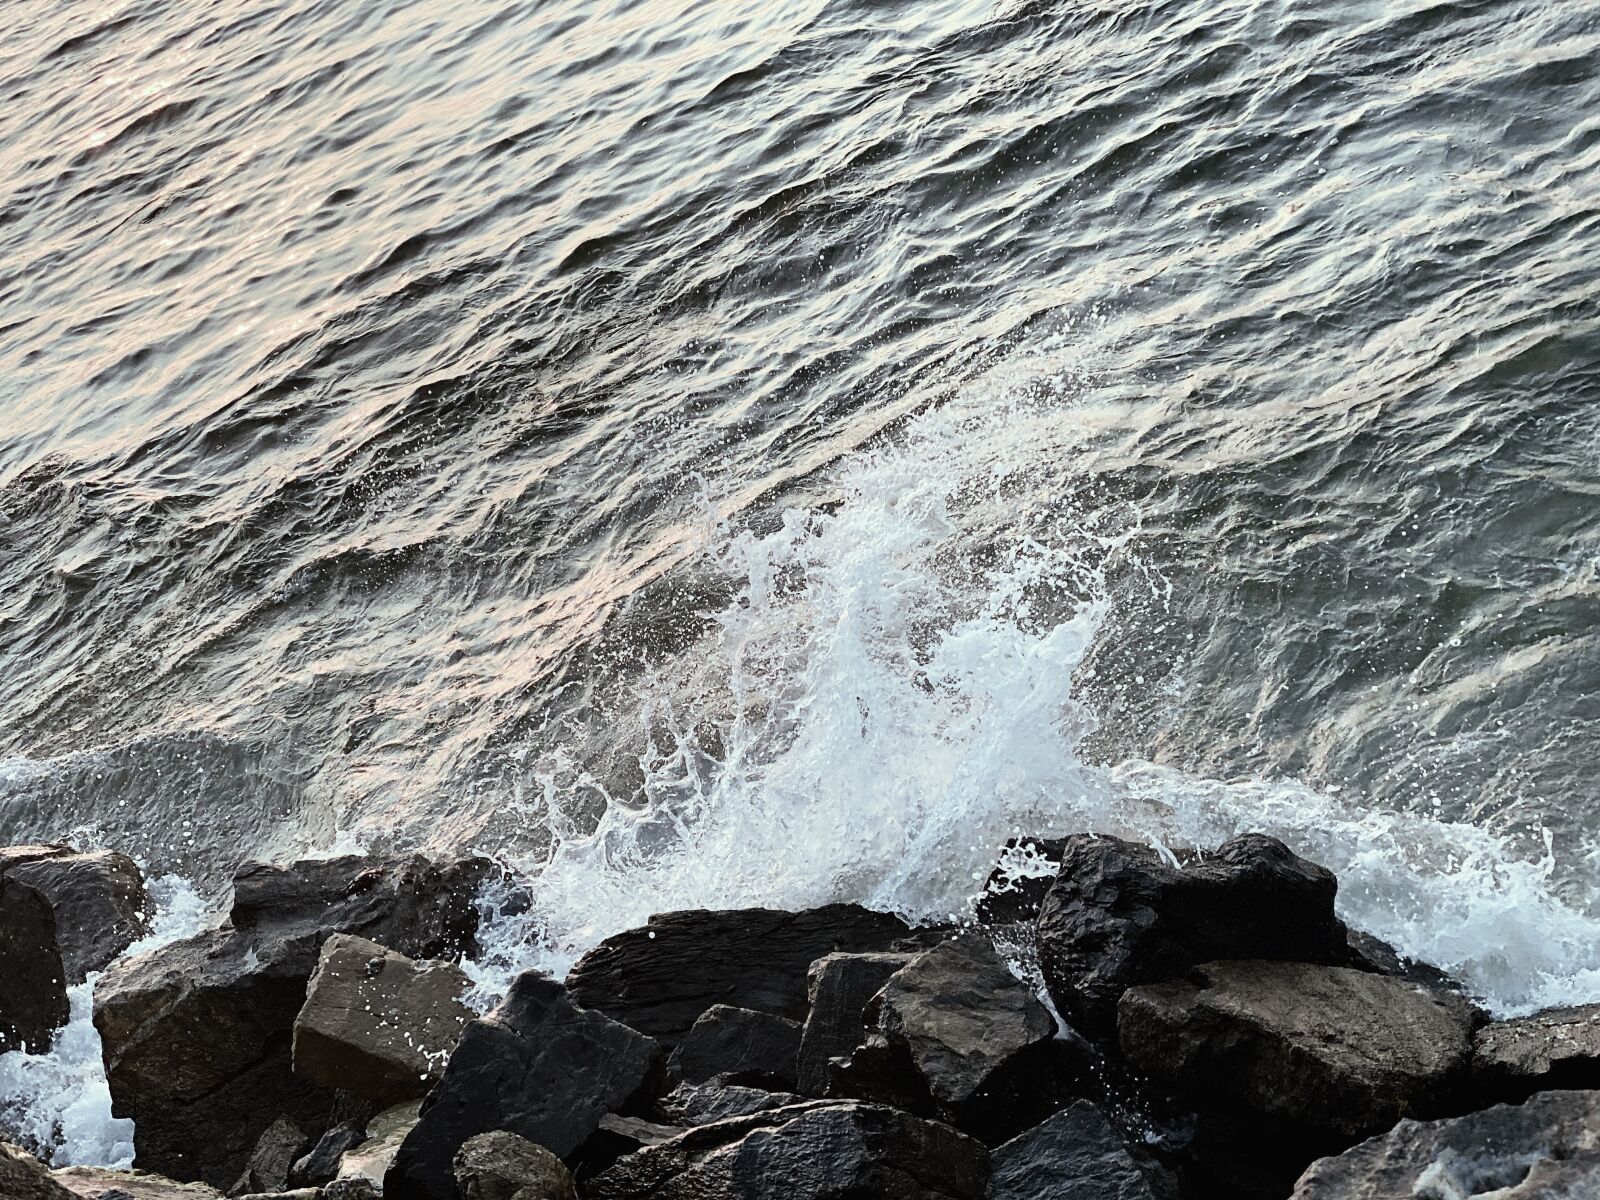 Apple iPhone 11 Pro Max + iPhone 11 Pro Max back dual camera 6mm f/2 sample photo. Wave, water, rocks photography